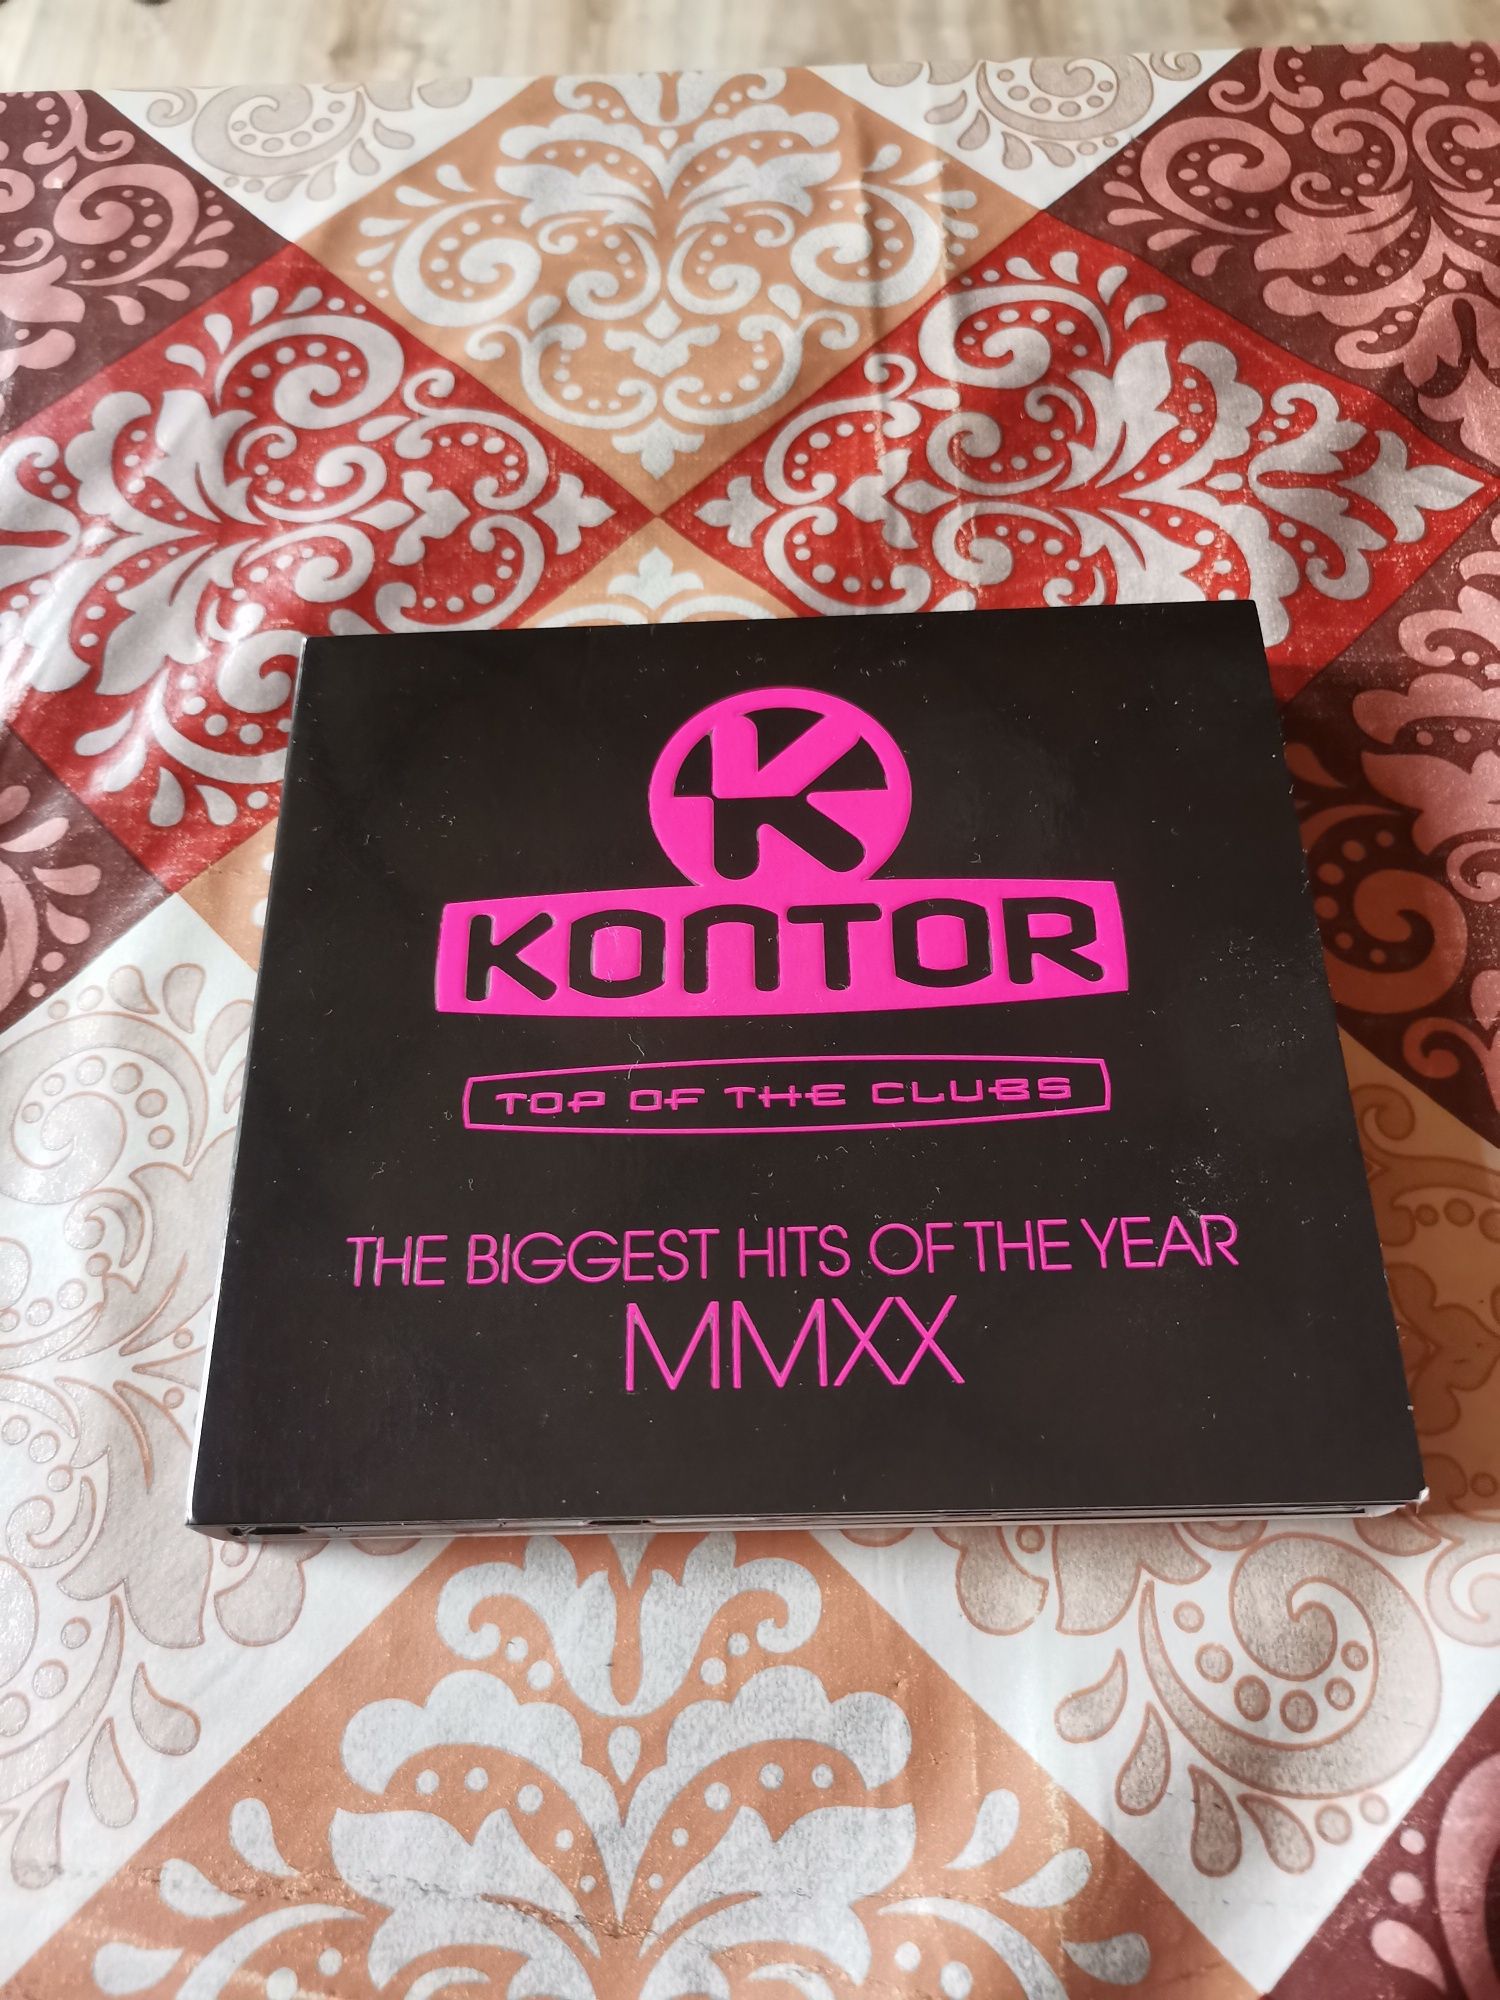 Kantor Top of The Clubs The Biggest Hits of The Year MMXX album